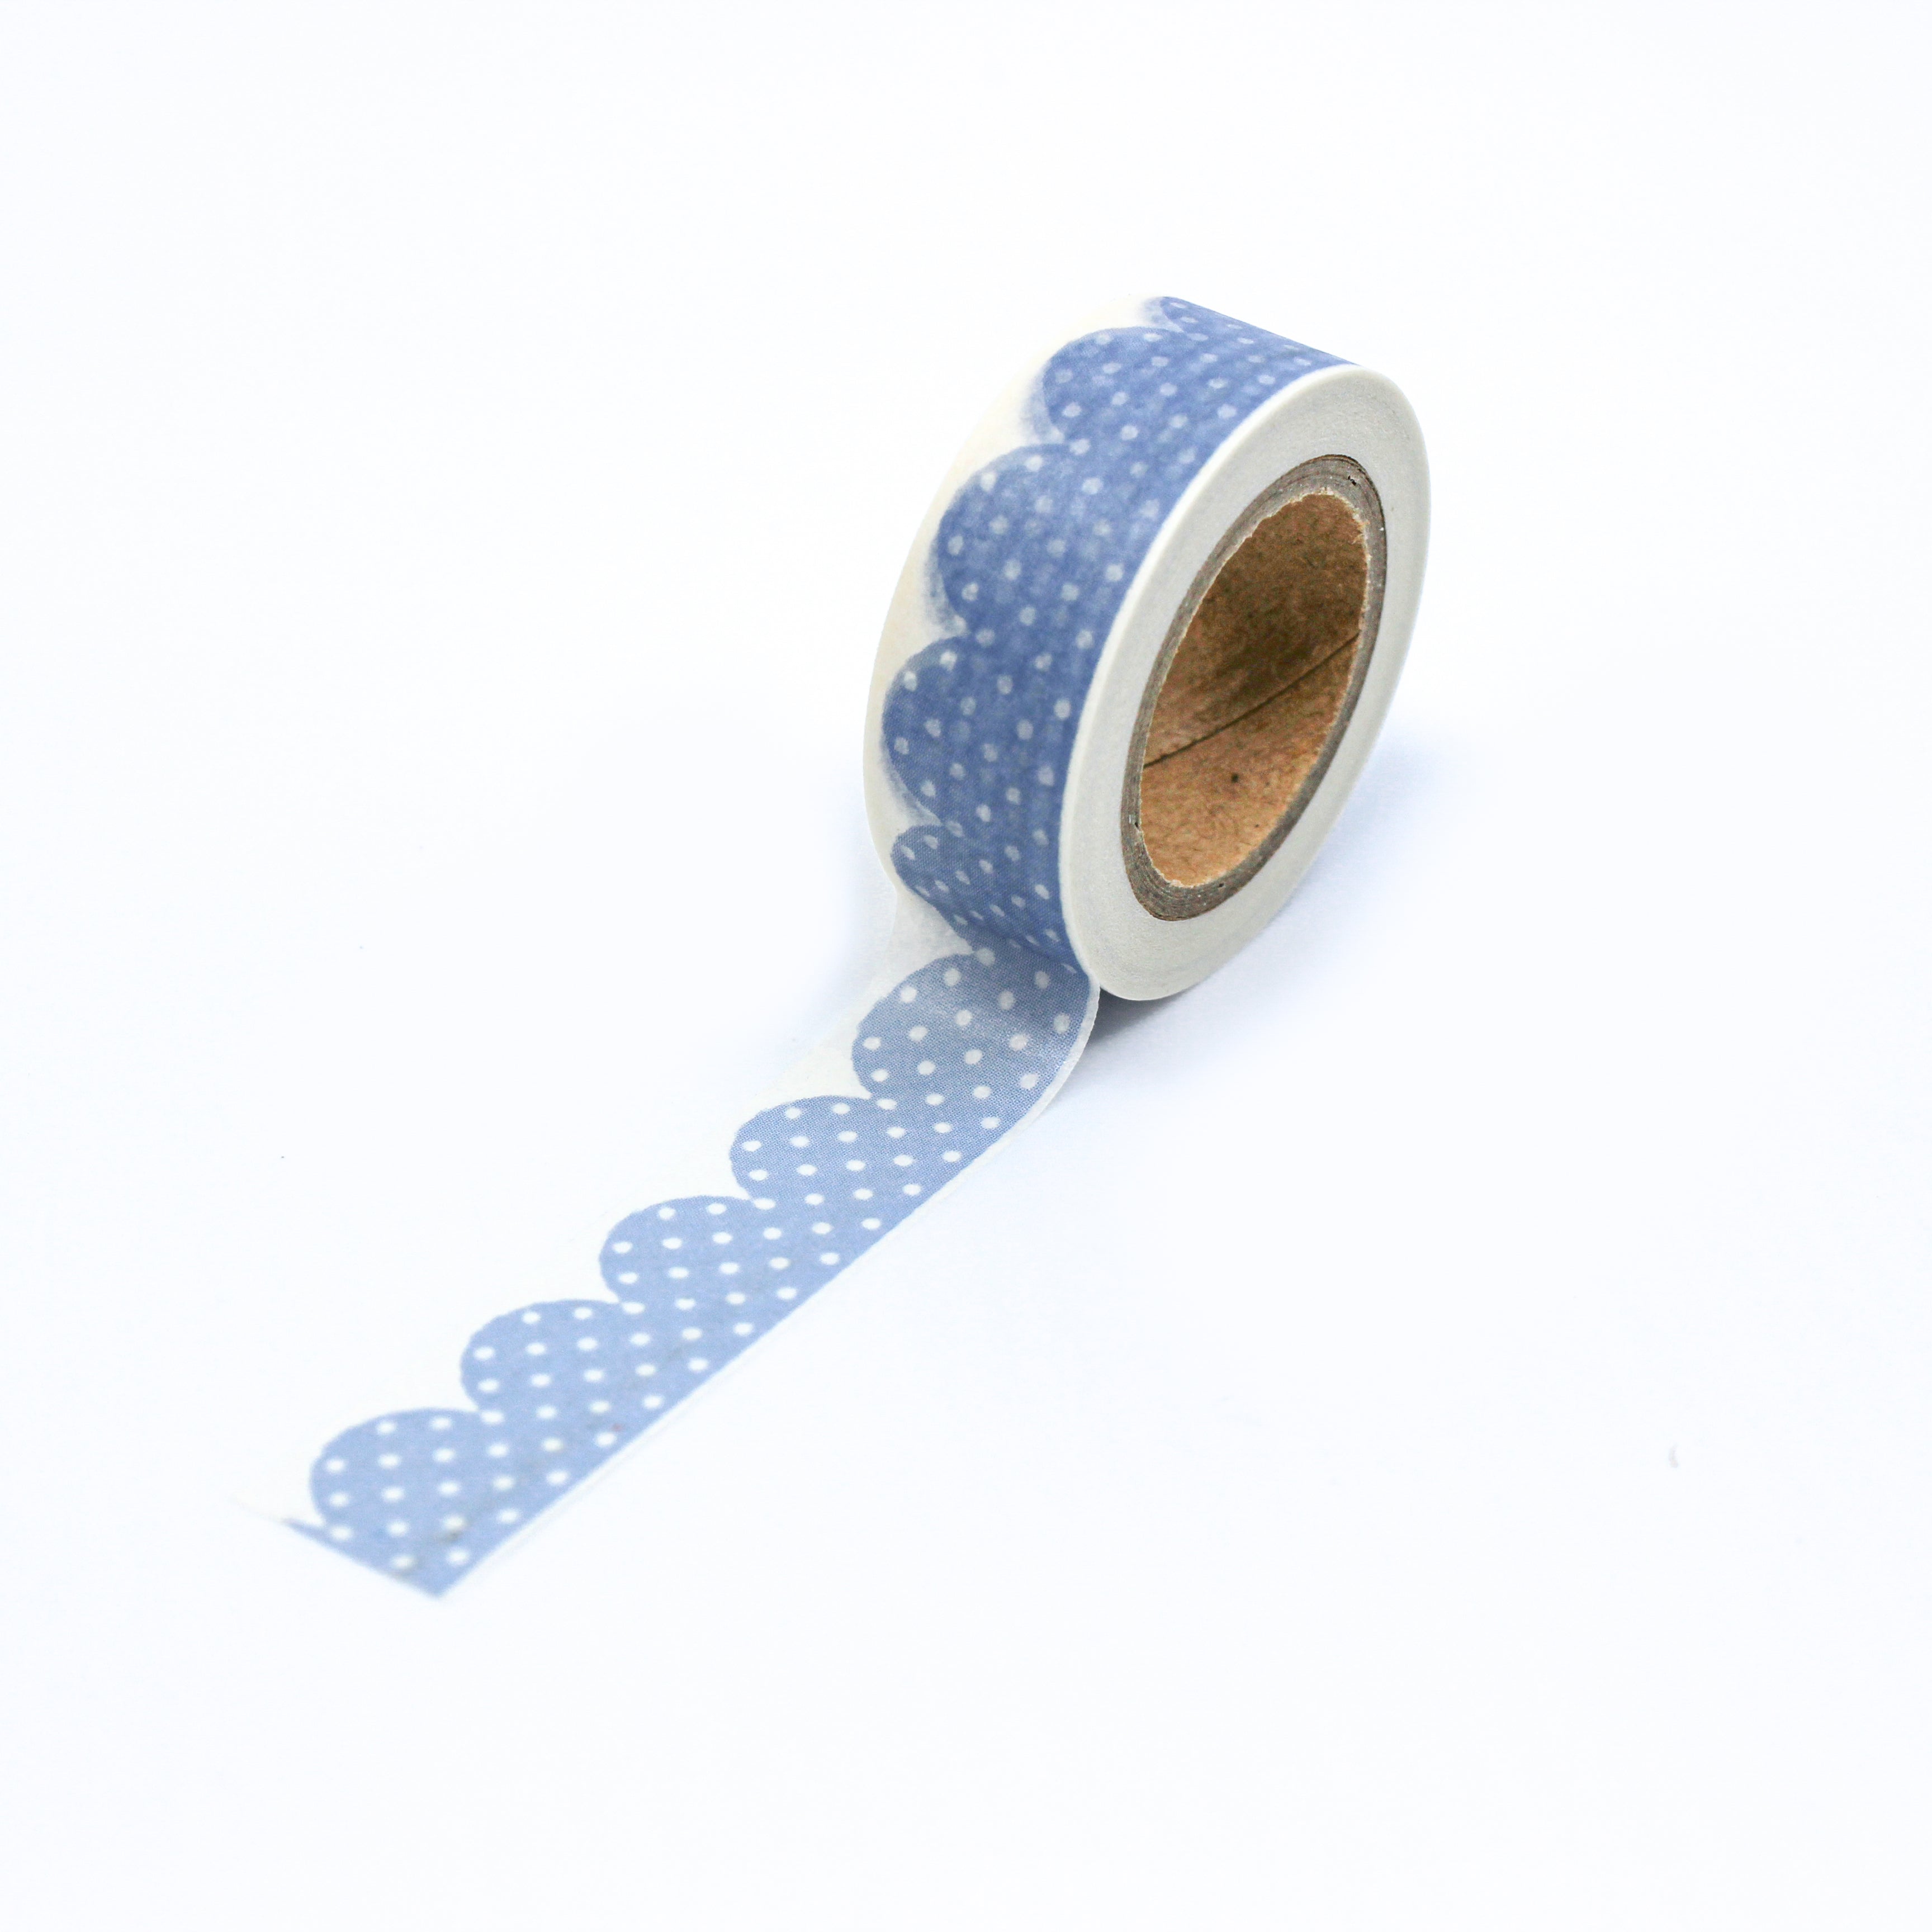 This is a full pattern repeat view of blue dot scallop clouds washi tape BBB Supplies Craft Shop